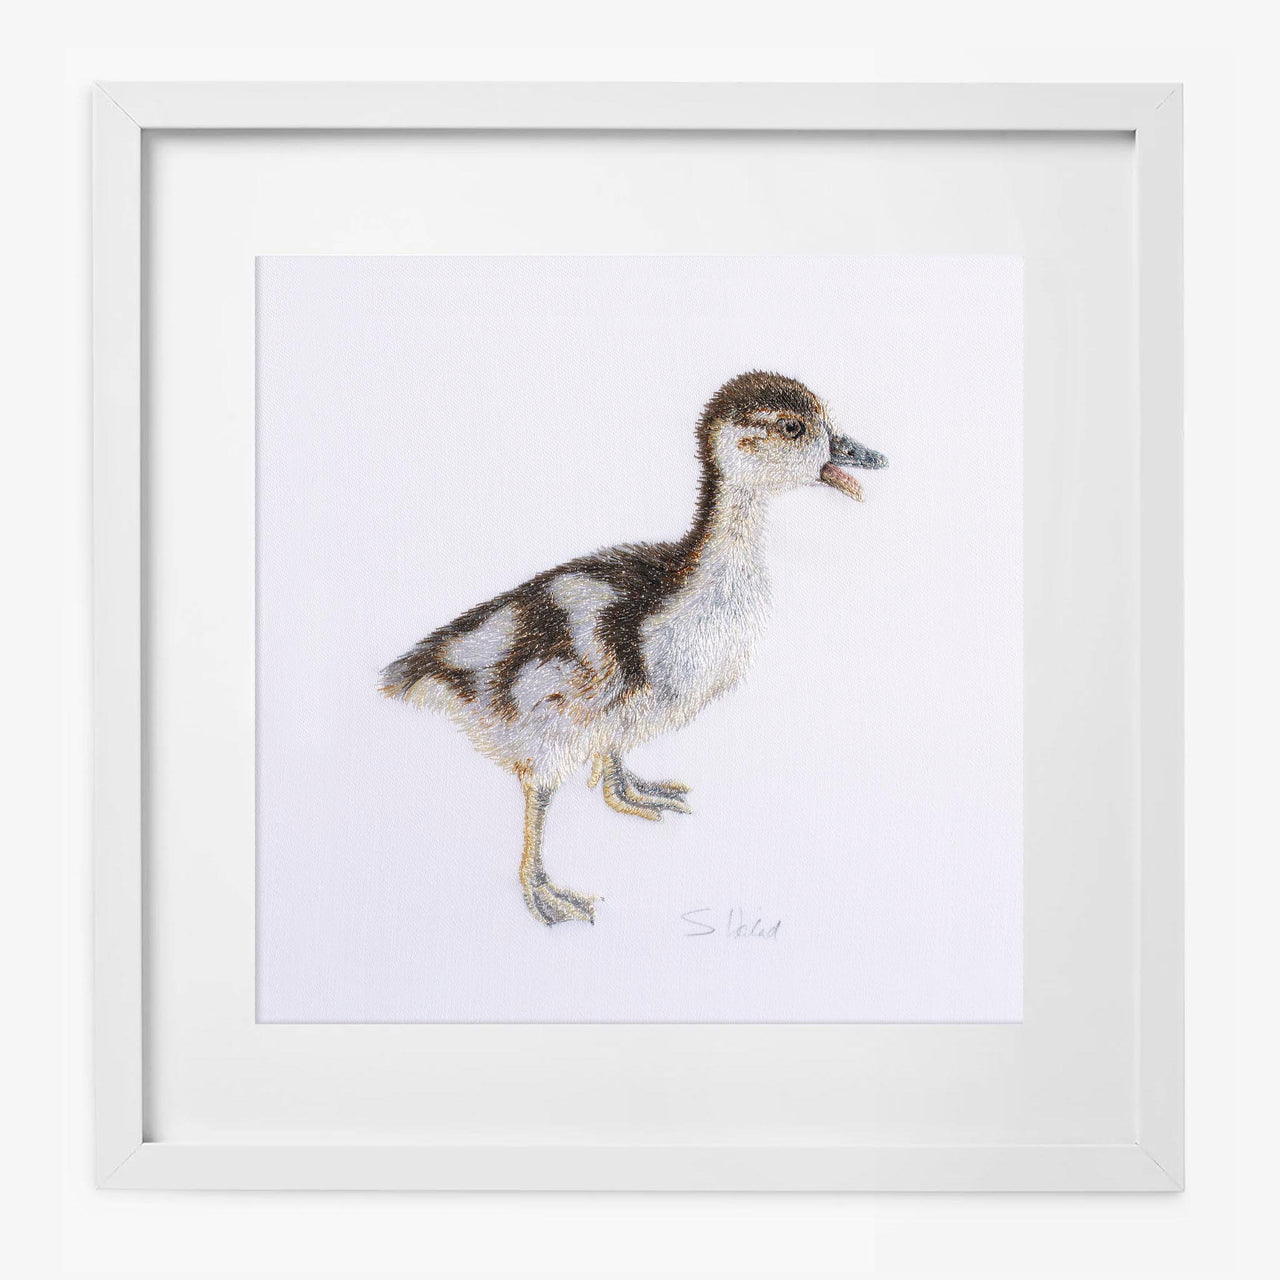 Gosling hand embroidered limited edition print in frame